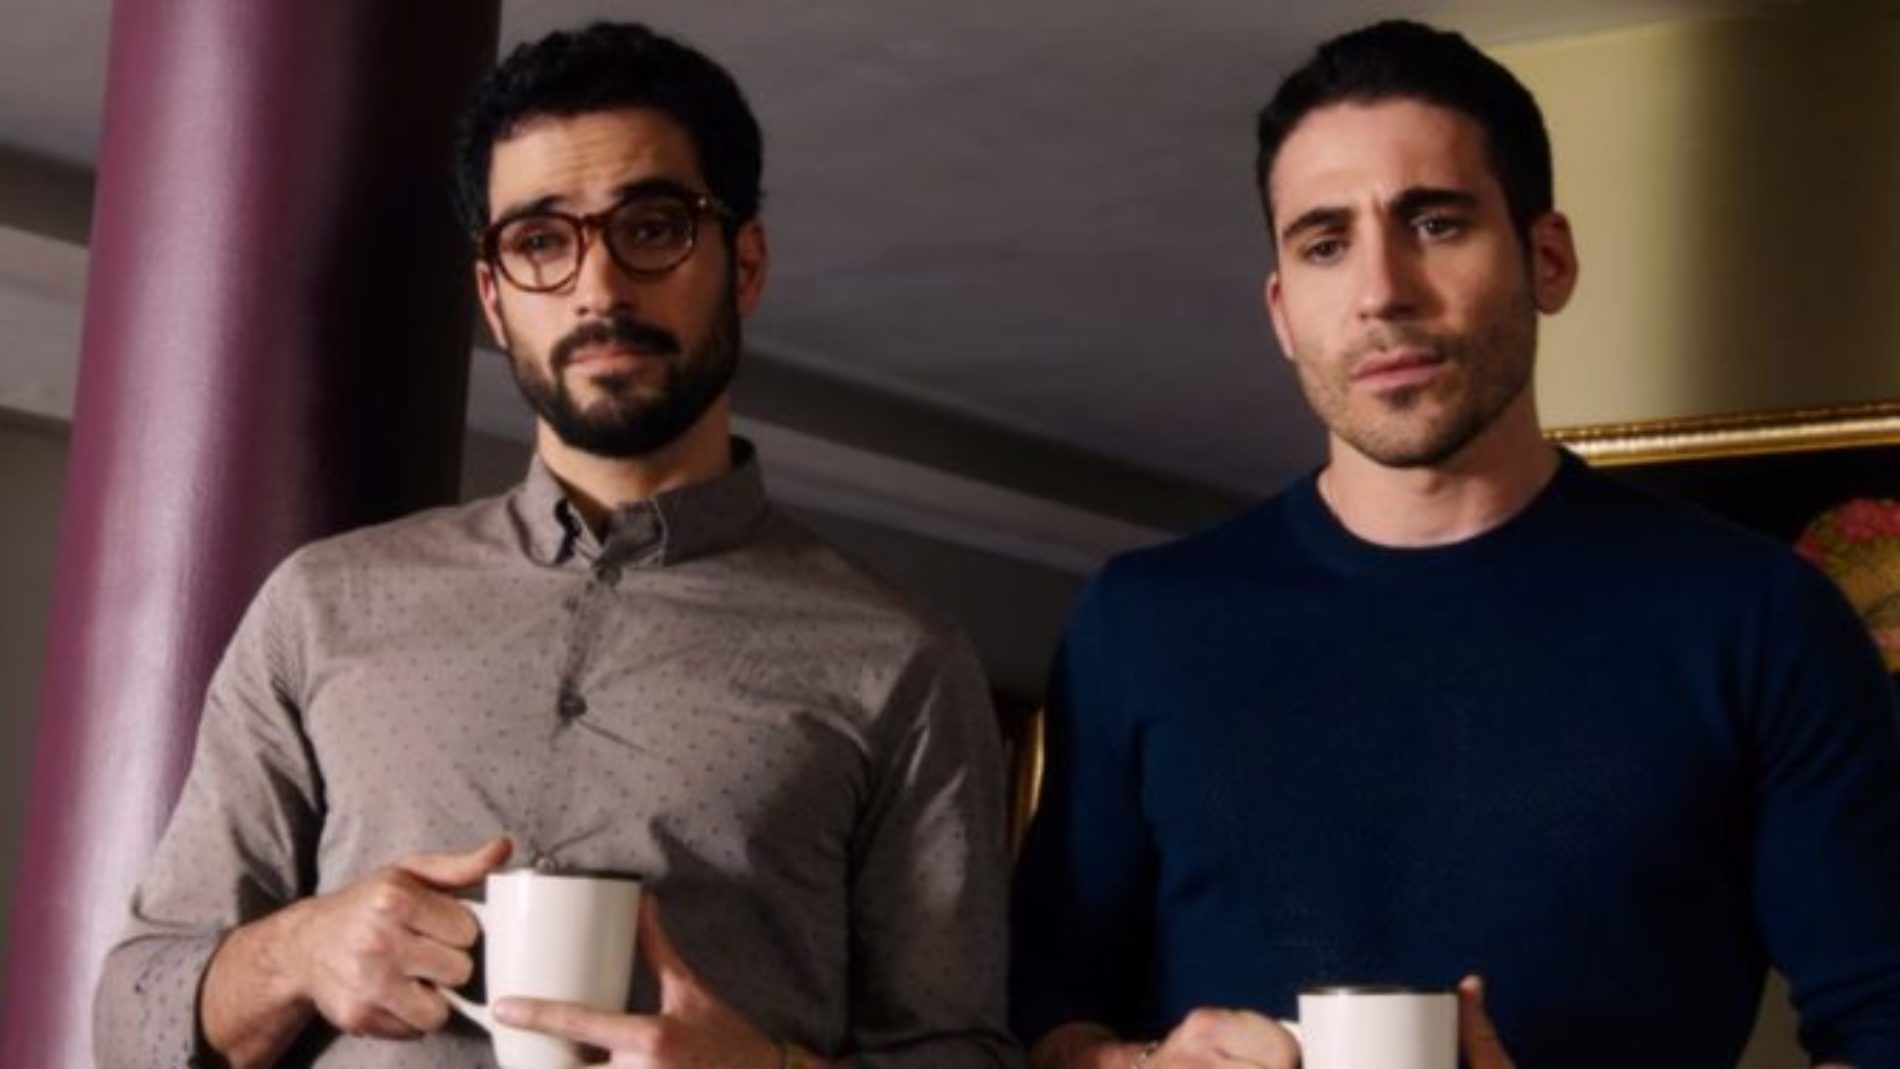 Straight guy goes on homophobic rant about ‘Sense8’ and the Internet lashes back